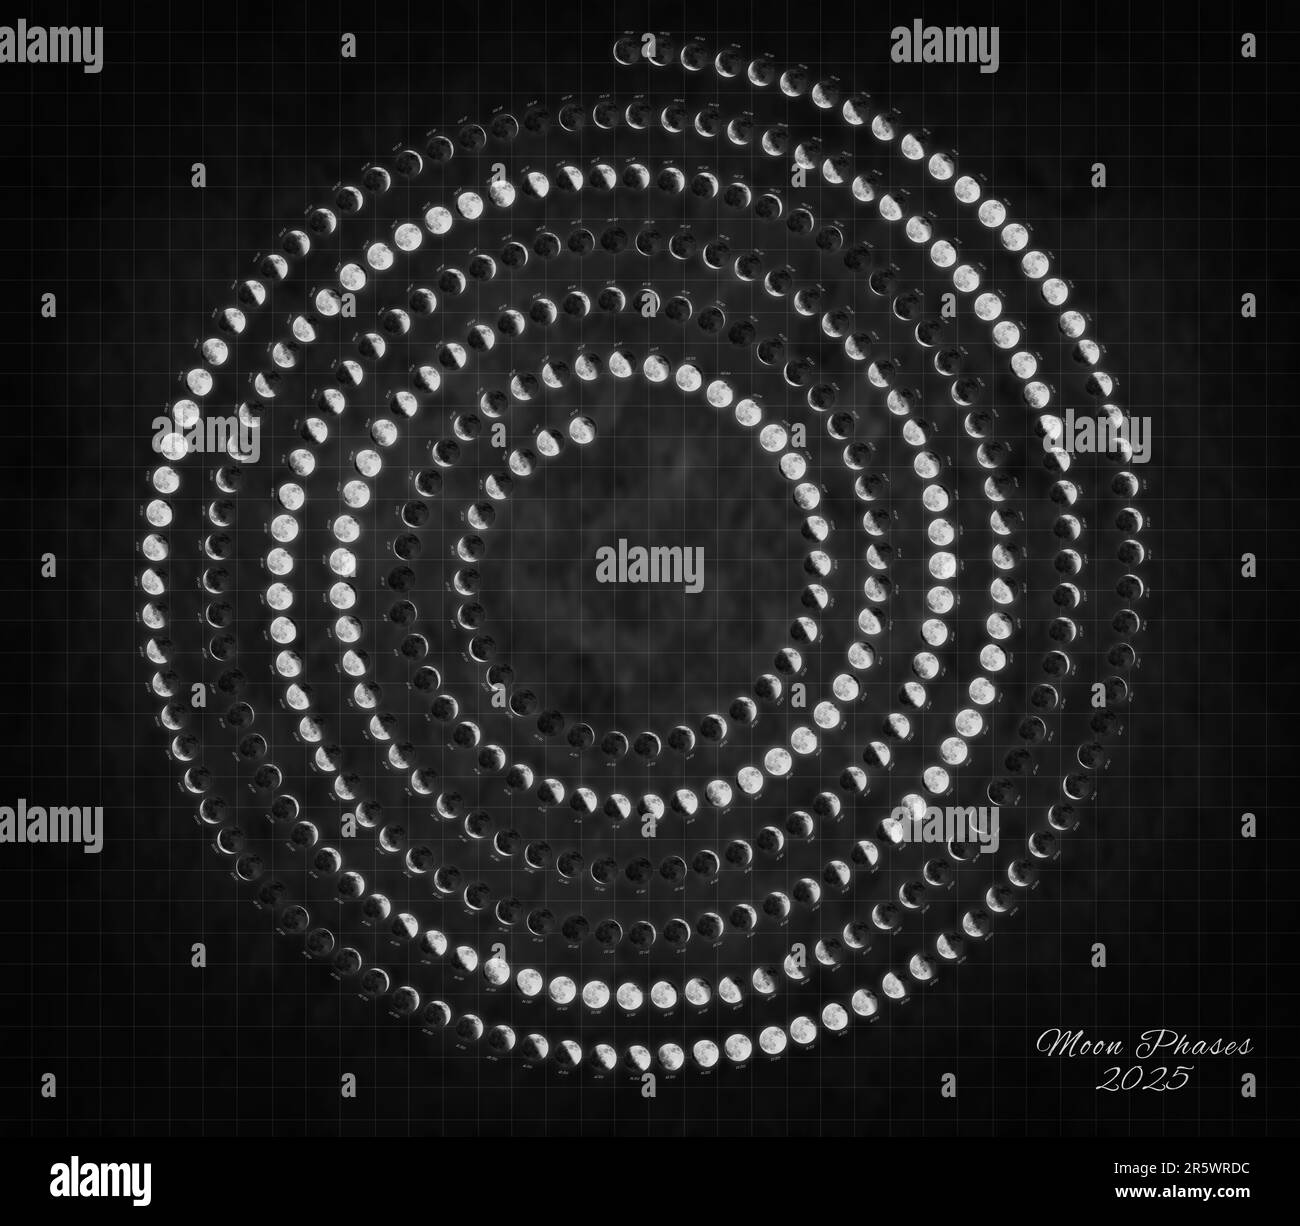 Moon Calendar 2025, Spiral Moon Phases on Black Background Stock Photo